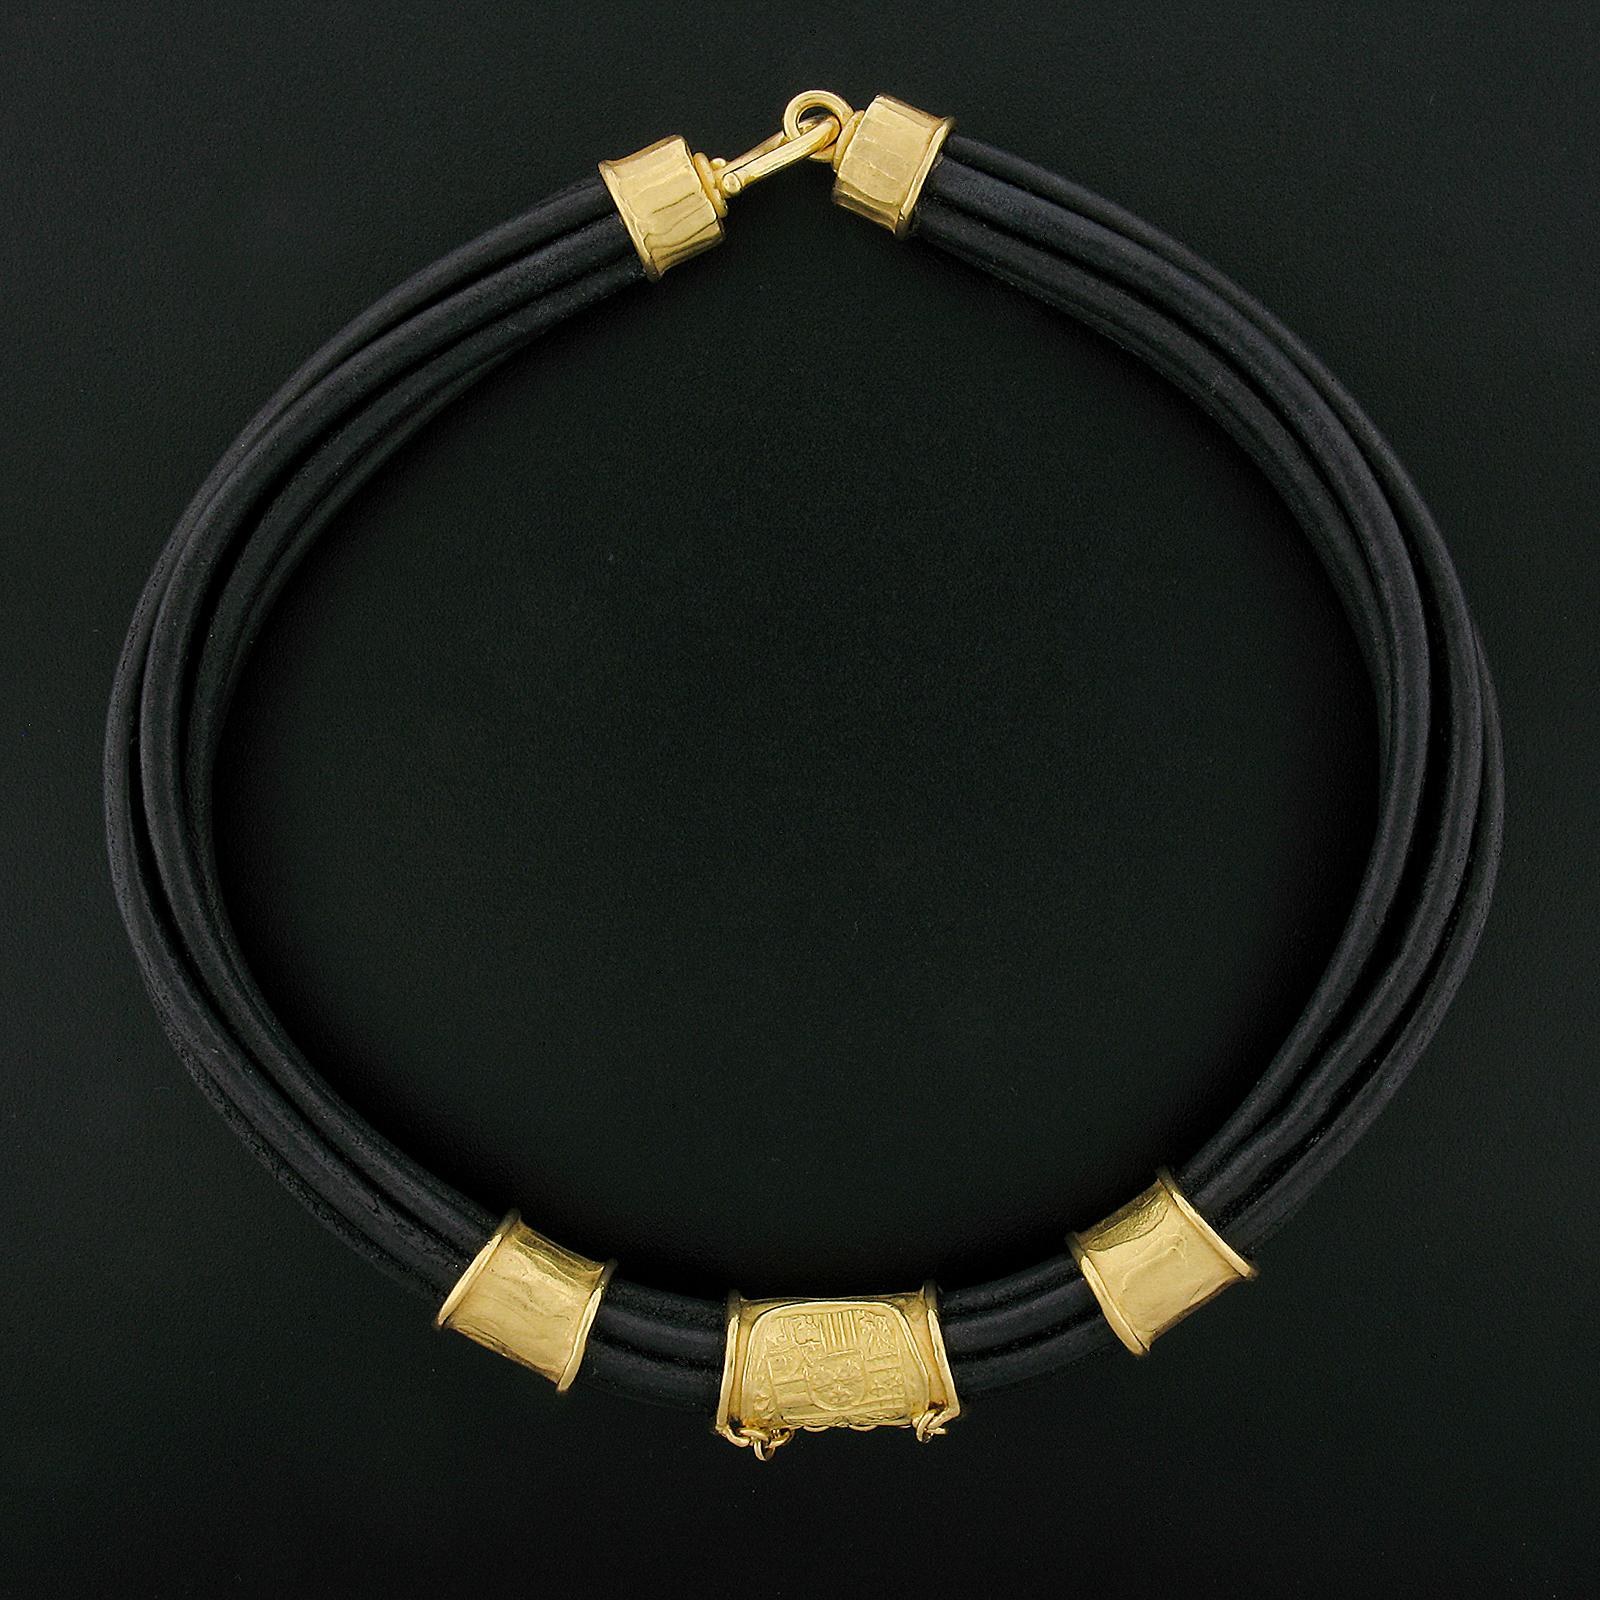 Denise Roberge 22k Gold Black Leather Cord Choker Necklace w/ Slide Charms 2